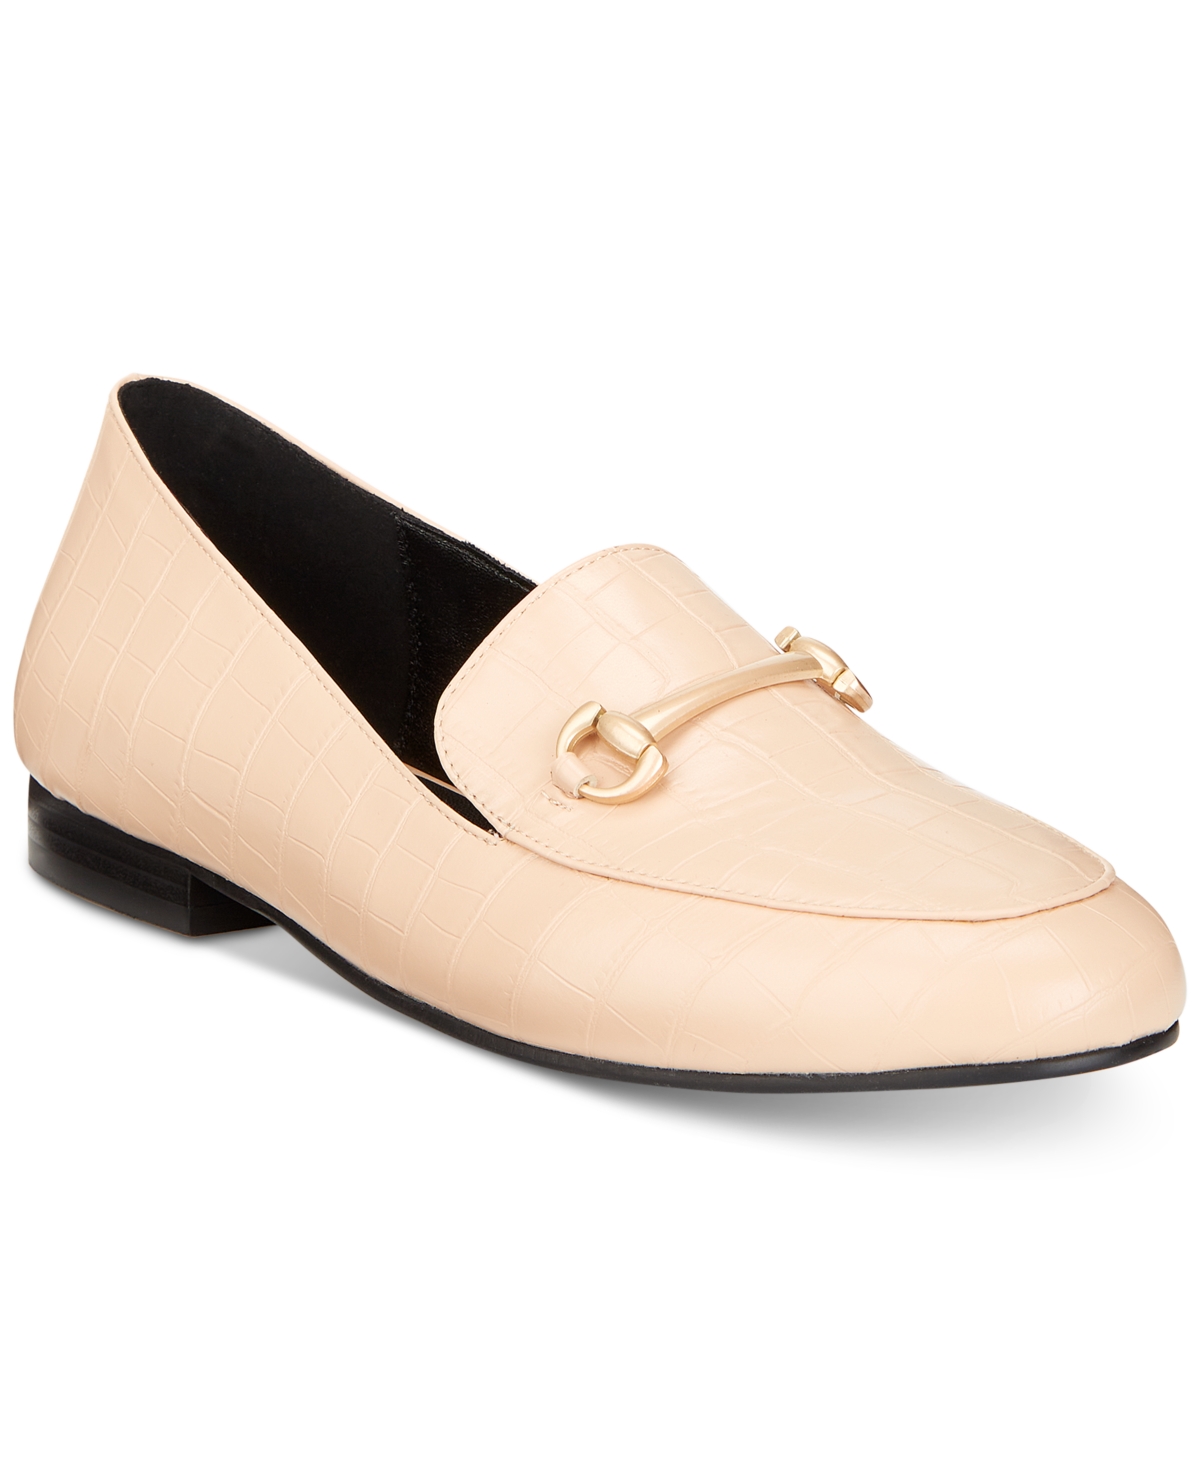 Vaila Shoes Women's Reese Slip-on Hardware Classic Loafer Flats-extended Sizes 9-14 In Cream